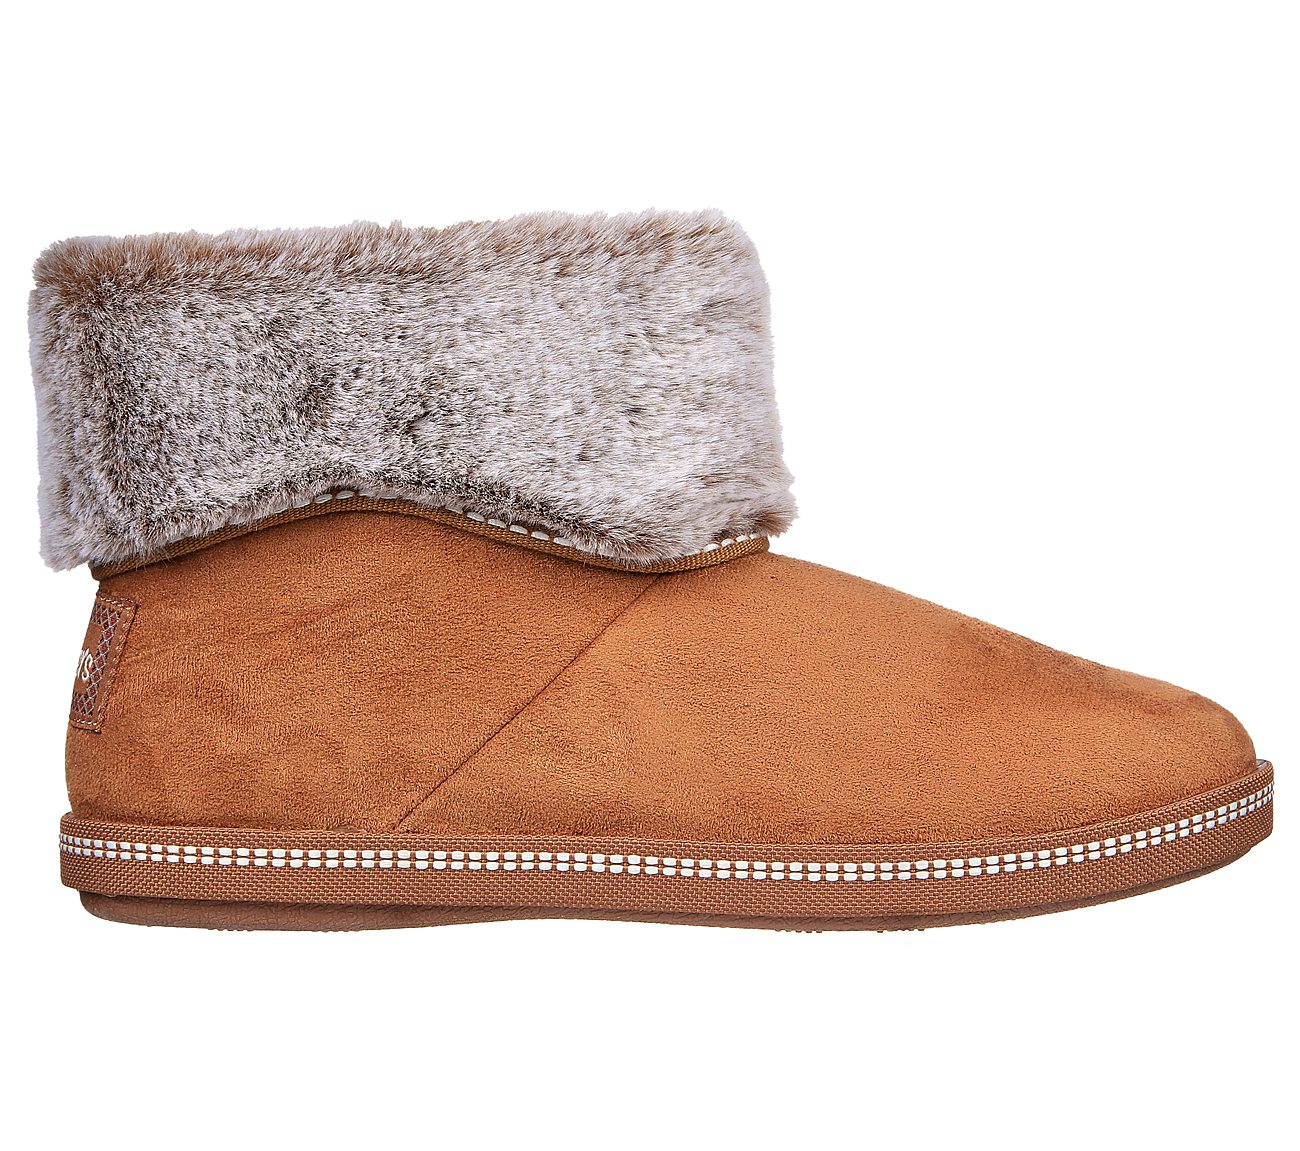 COZY CAMPFIRE - MEANT TO BE, CHESTNUT Footwear Lateral View